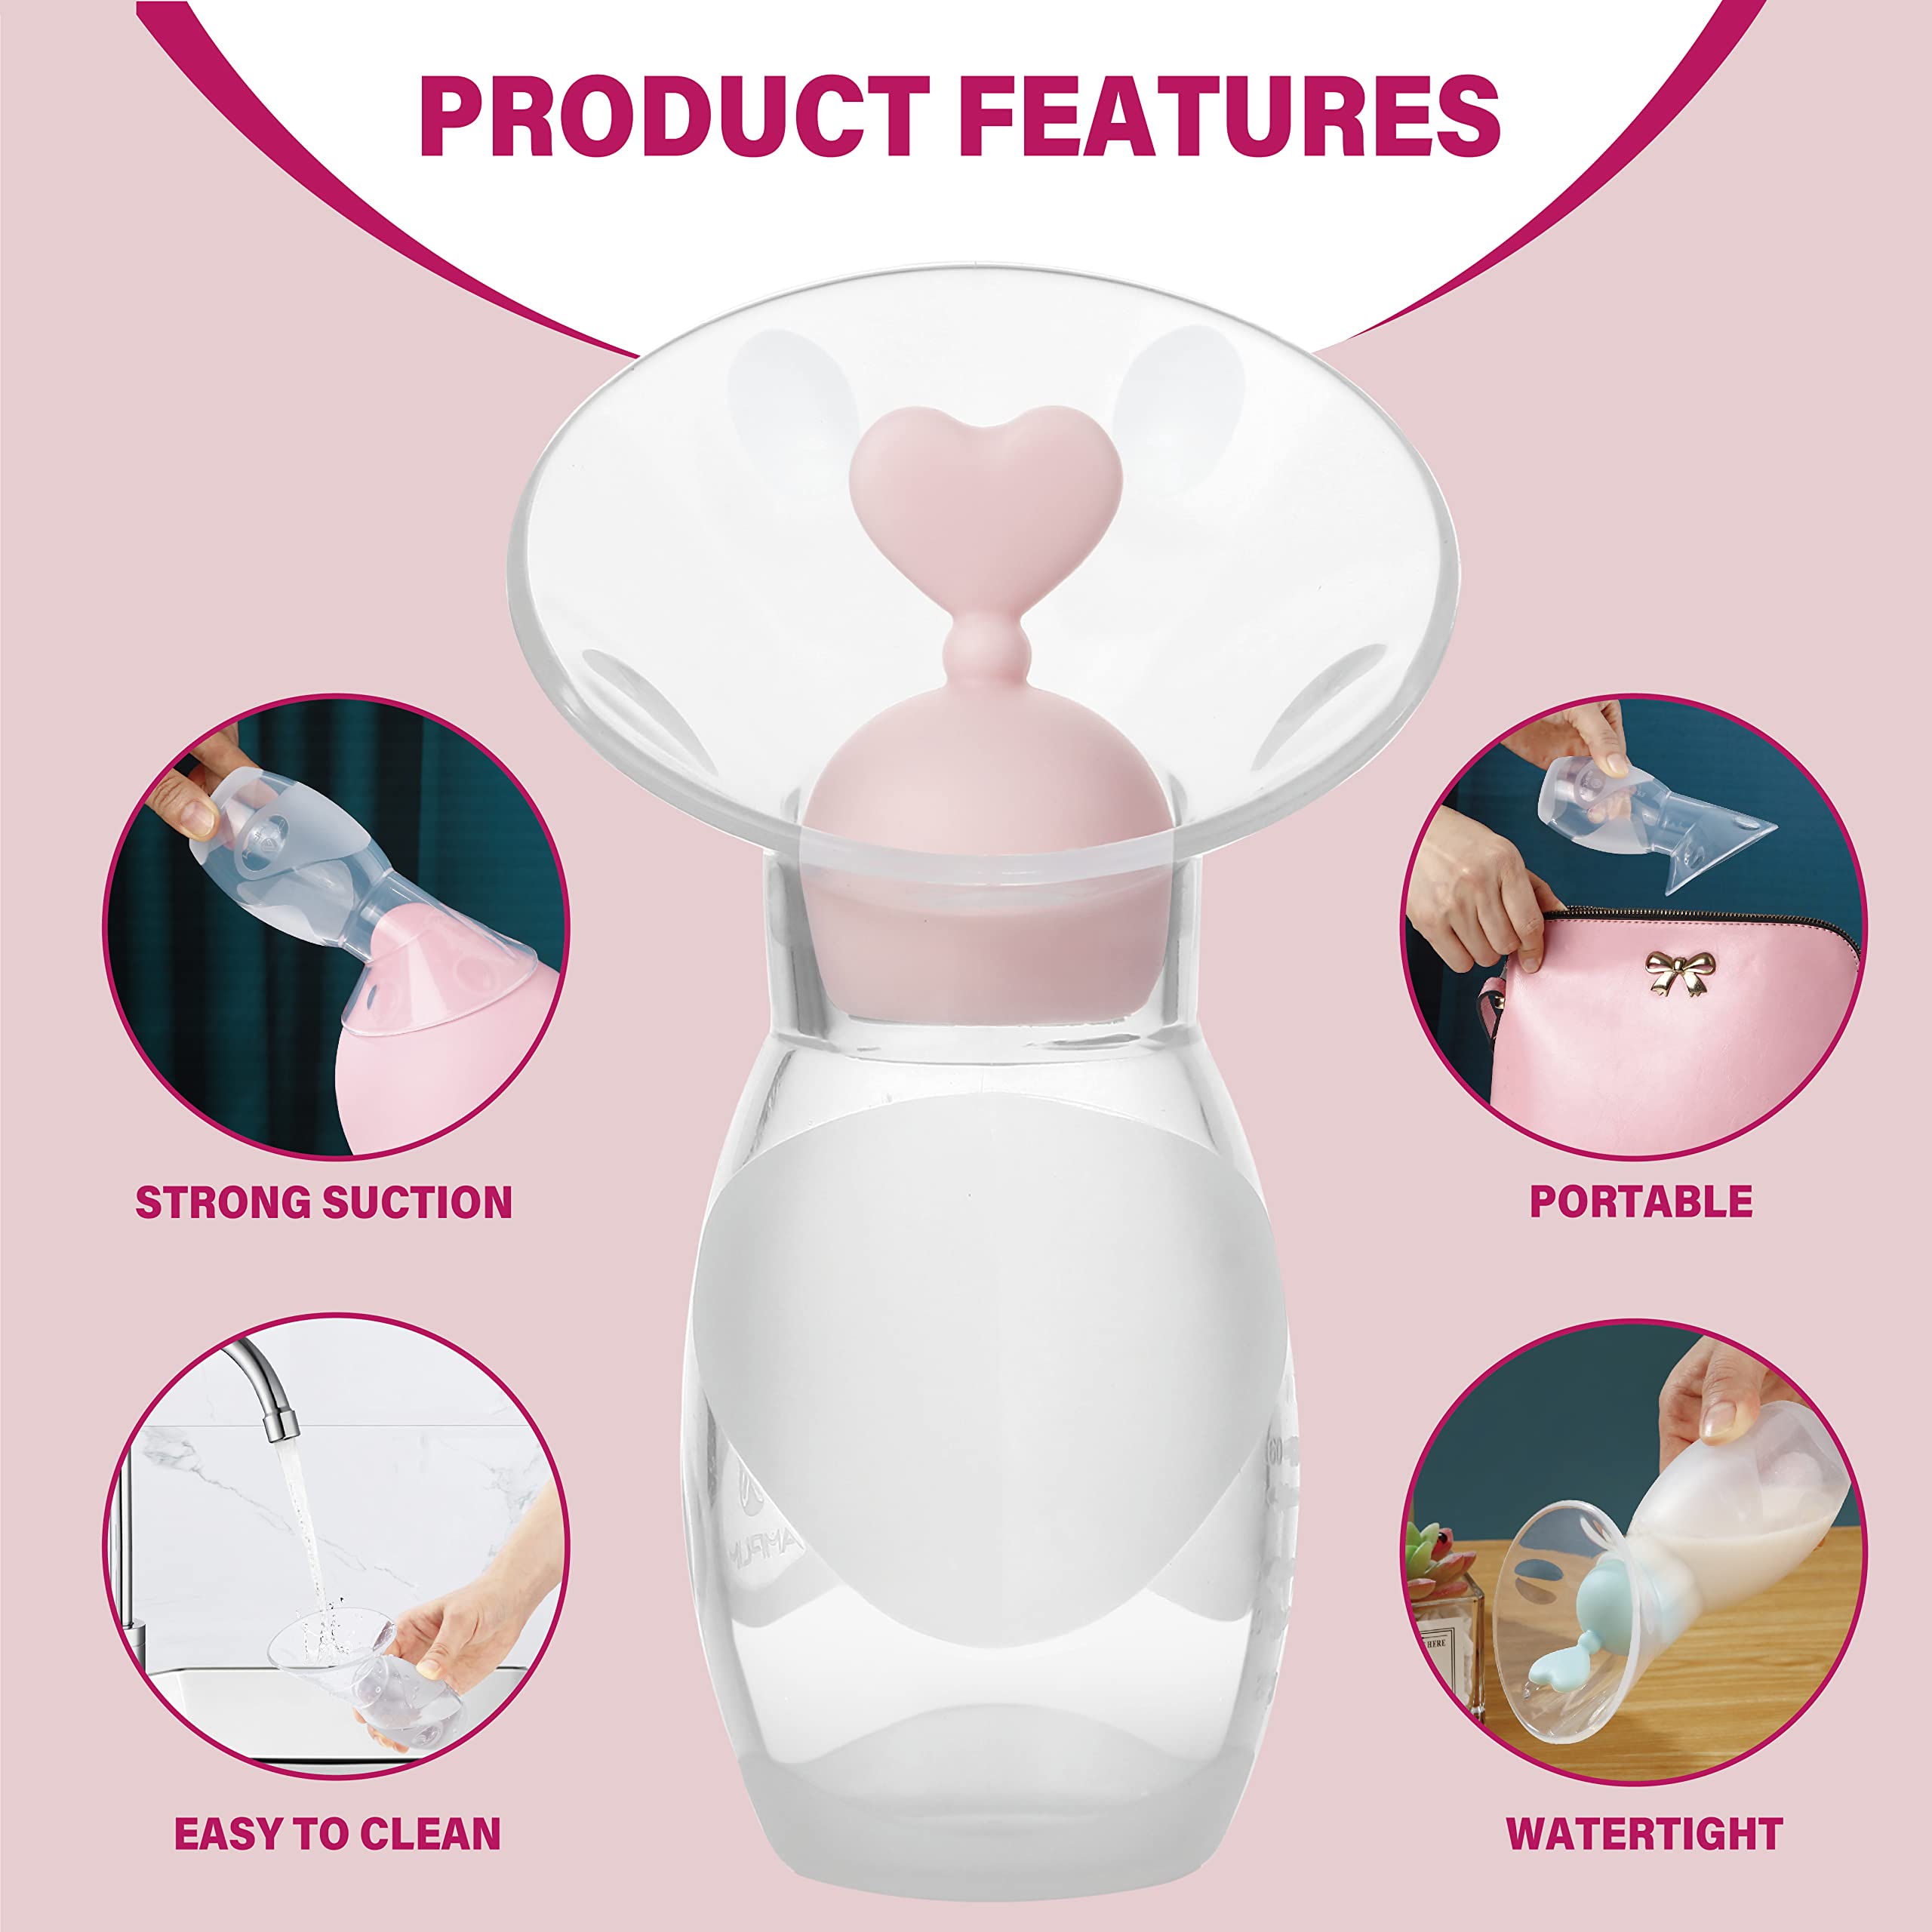 Amplim Manual Breast Pump | Gen 2 Food Grade Silicone Milk Collector for Breastfeeding Nursing Mom with Stopper | Must Haves Registry Essentials for Newborn, Infant, Baby | 4 oz (Pink)